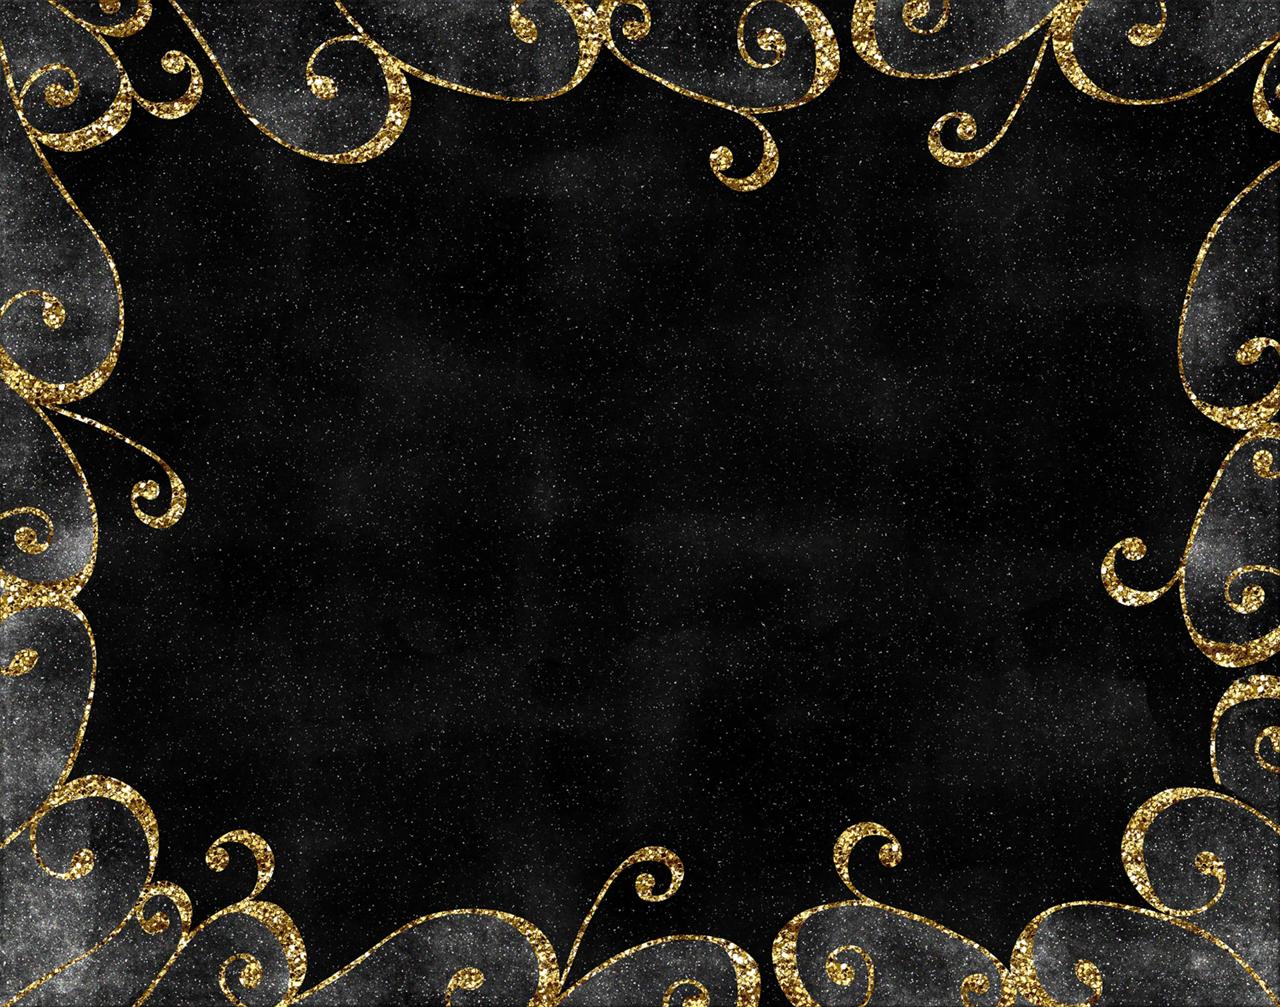 Gold Frame with Black backgrounds